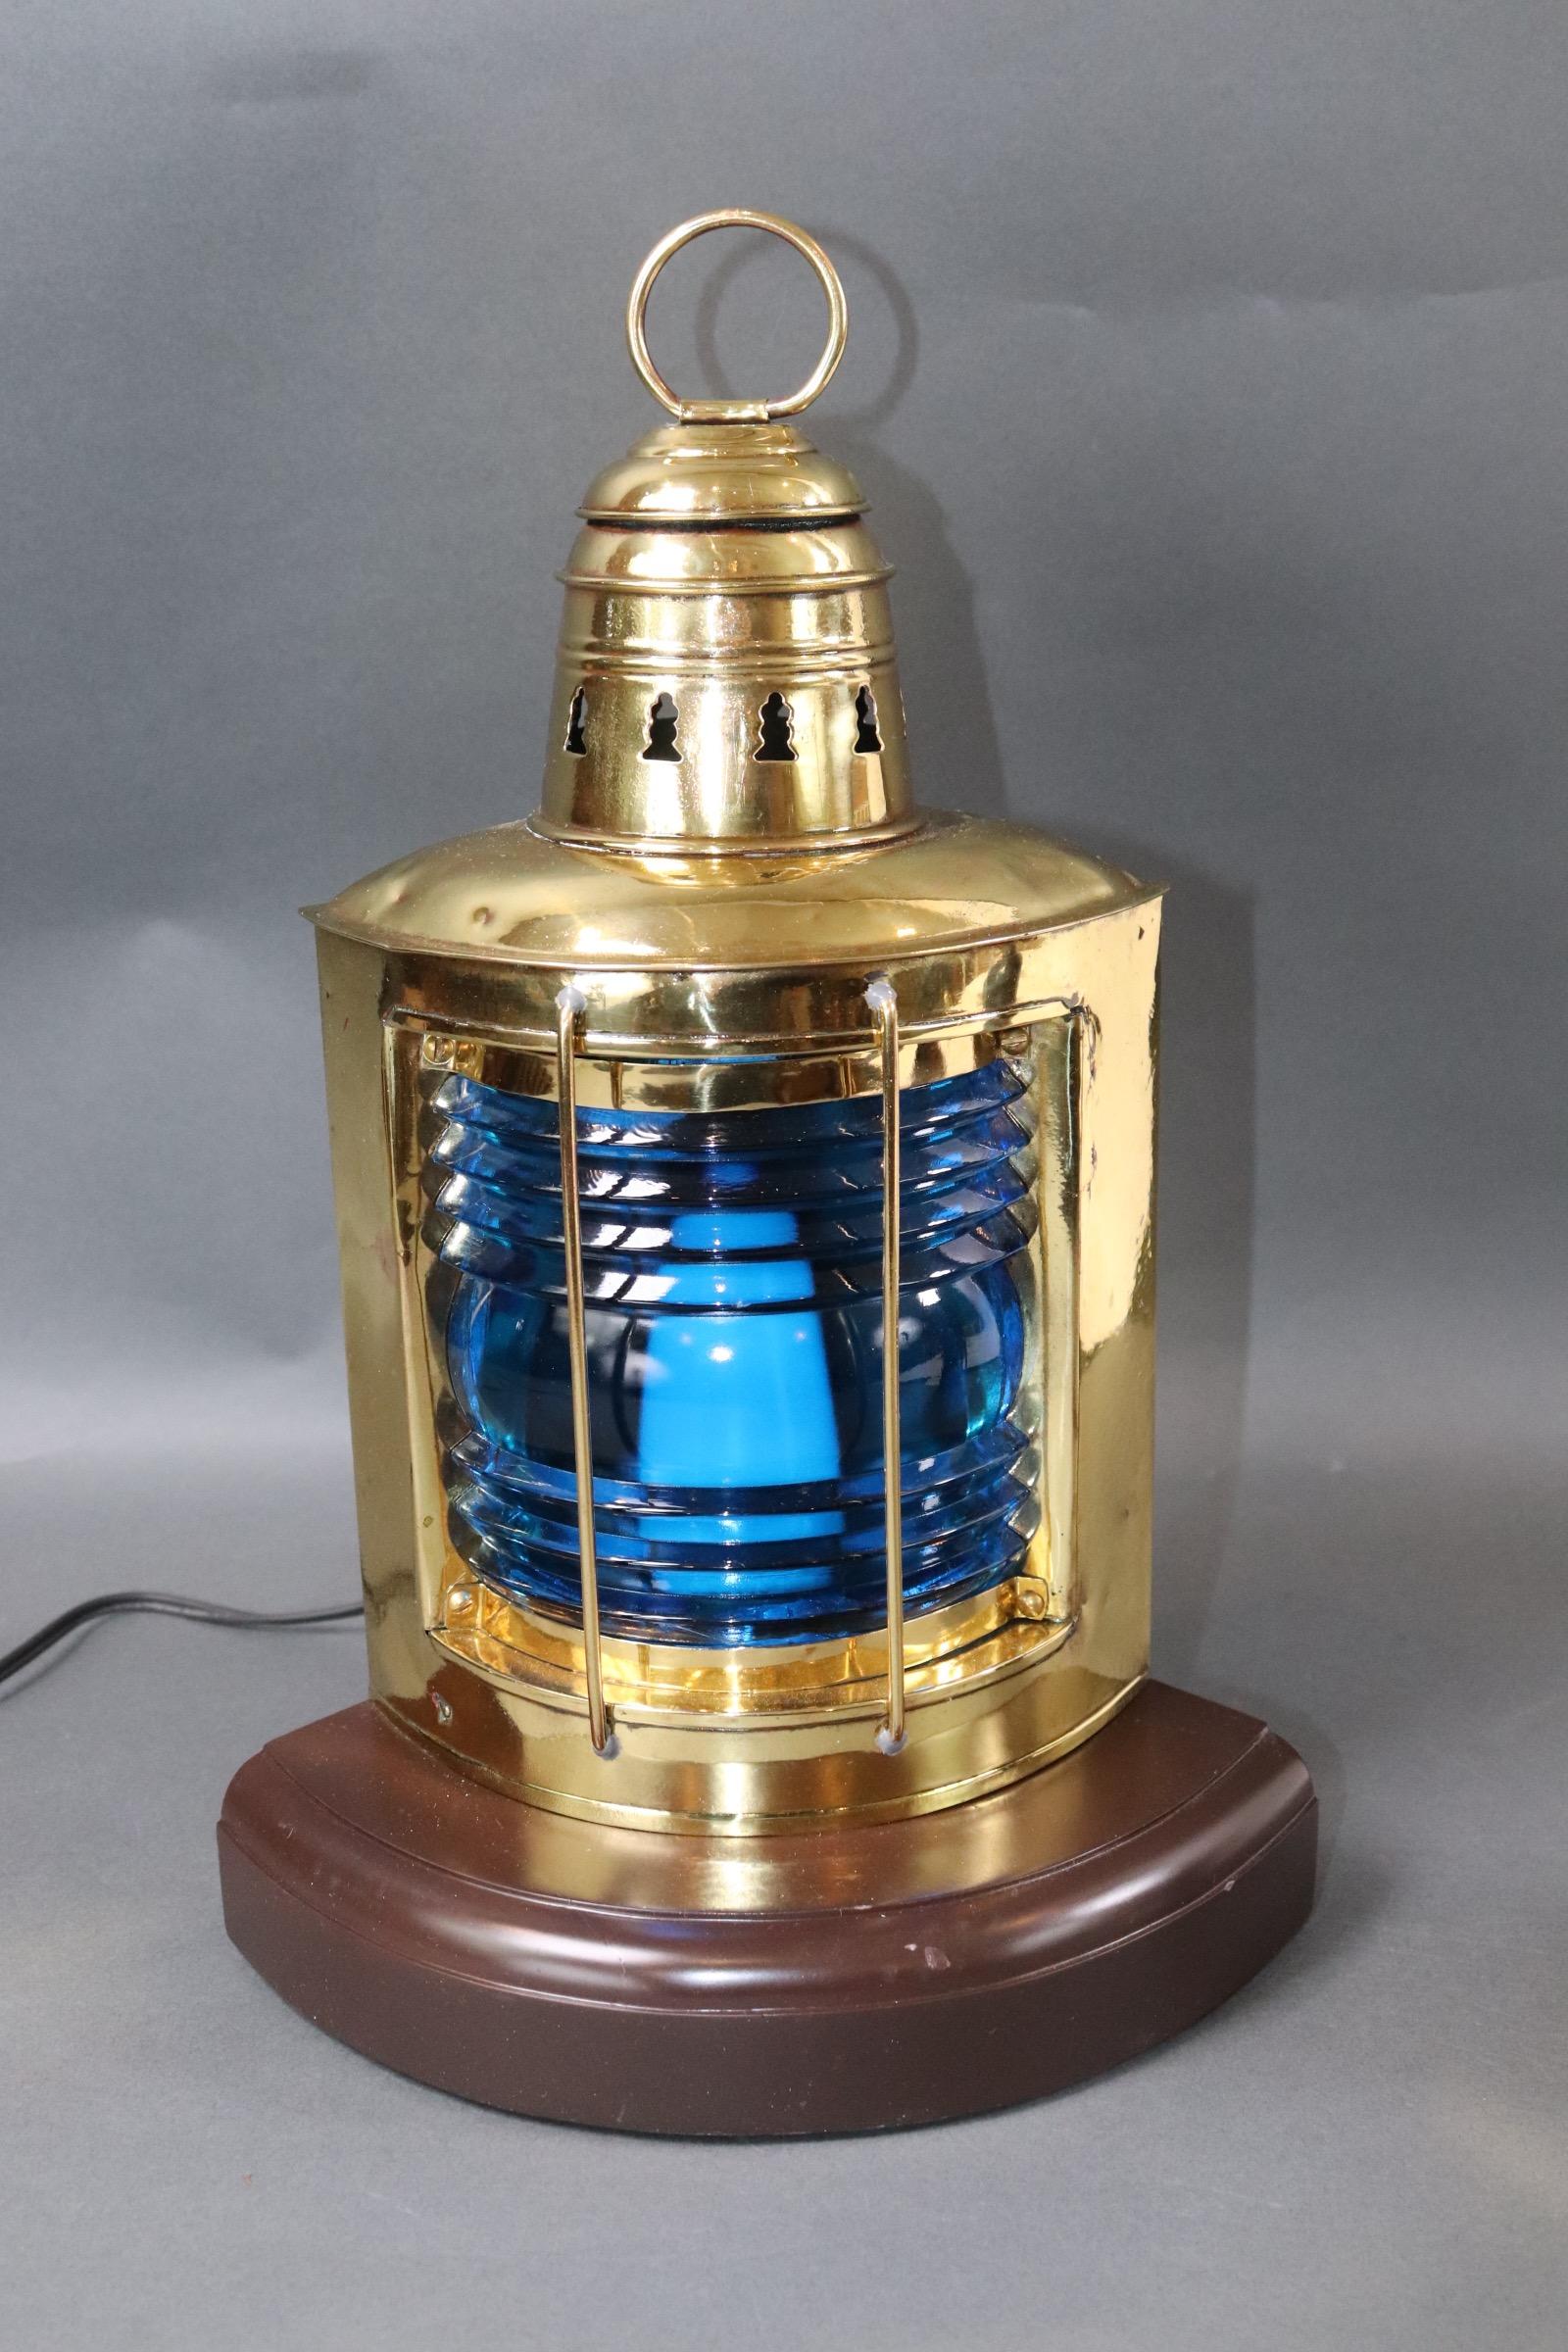 Solid brass highly polished starboard ships lantern with rich blue fresnel lens. Mounted to a custom wood base with rich dark finish. Engraved 